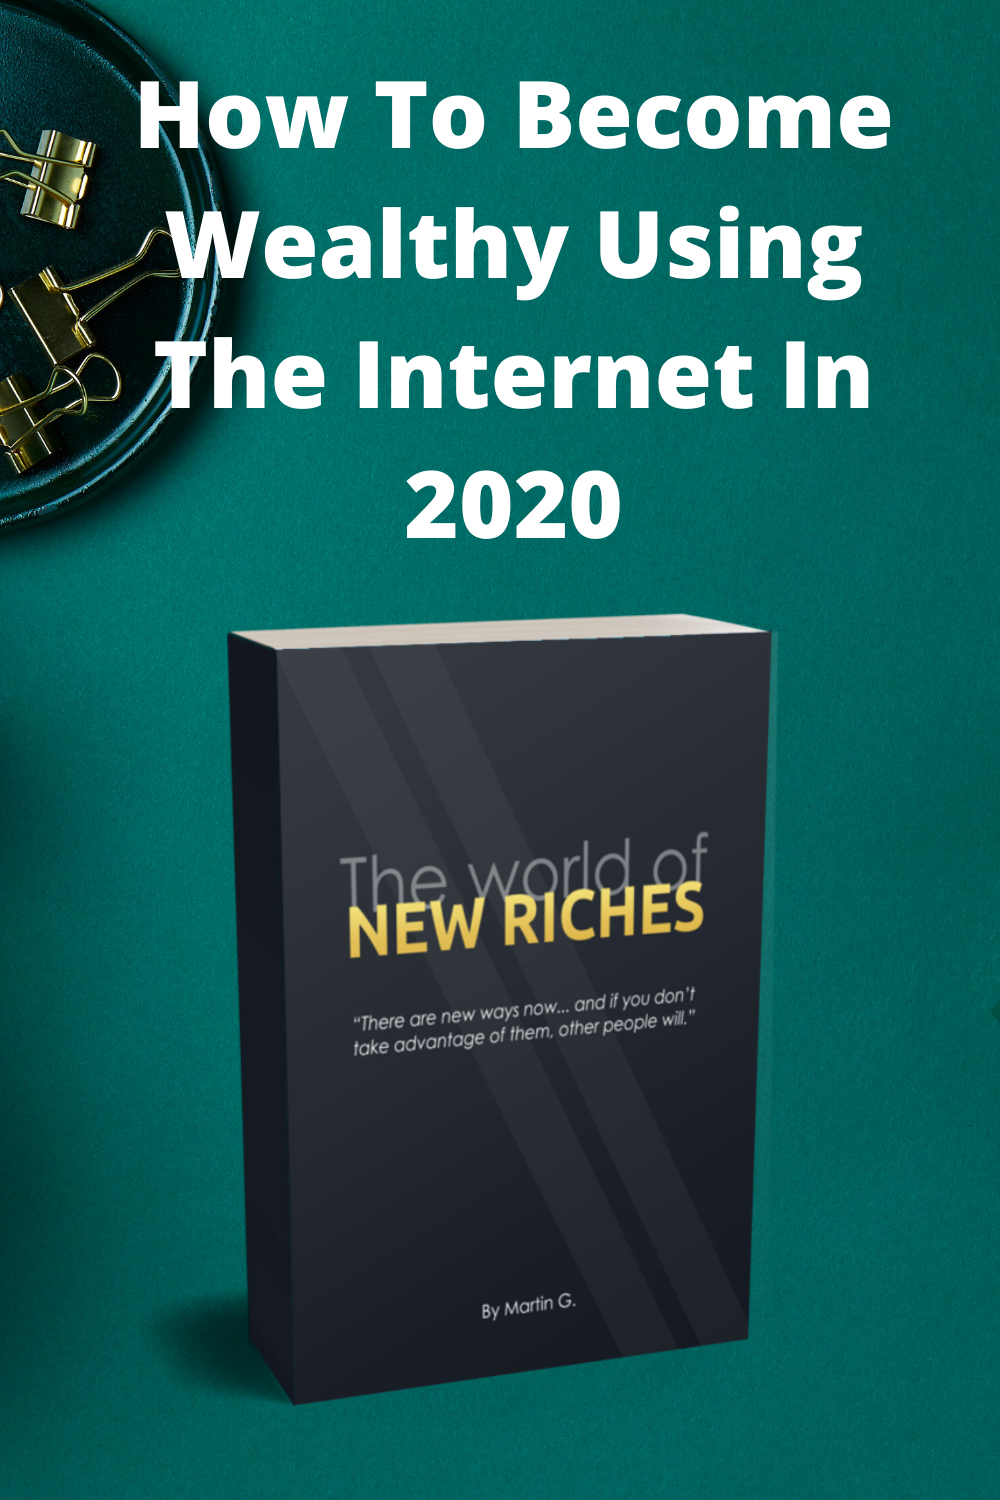 How To Become Wealthy Using The Internet In 2020